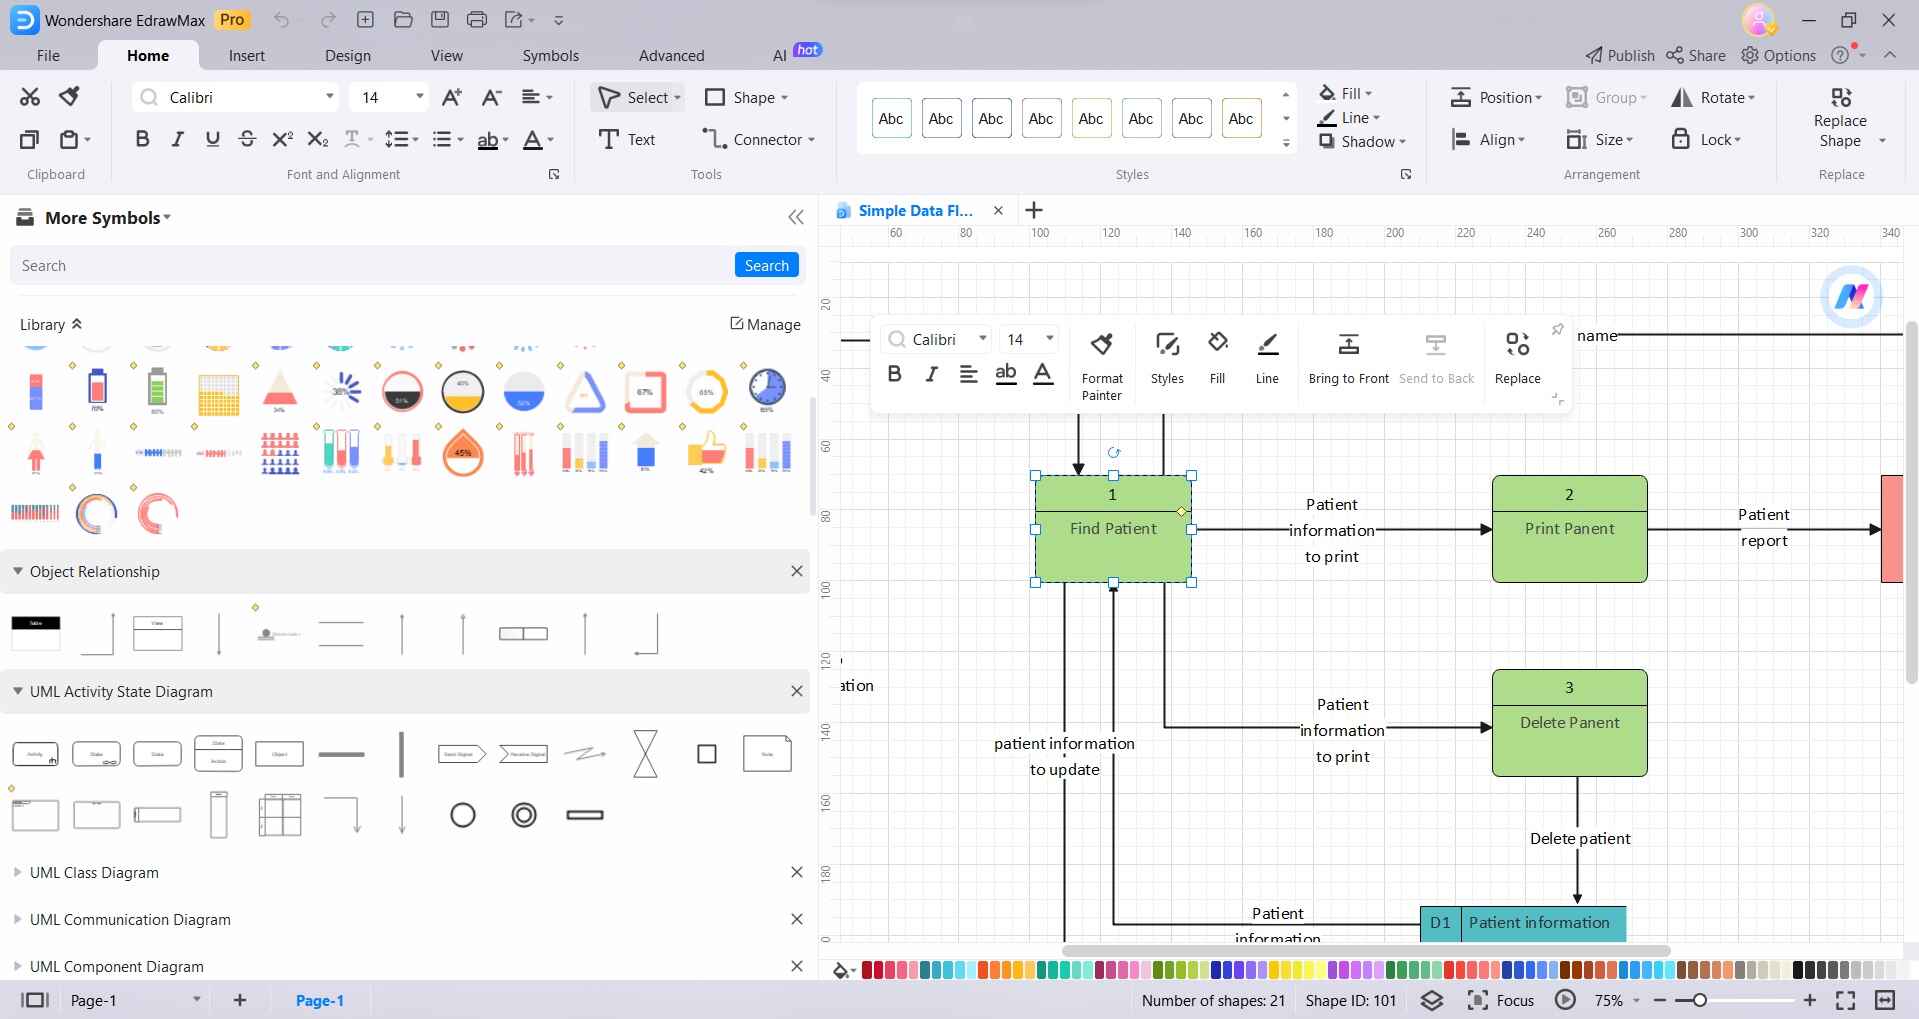 how-to-use-visio-online-editor-free-for-creative-flow-04.jpg